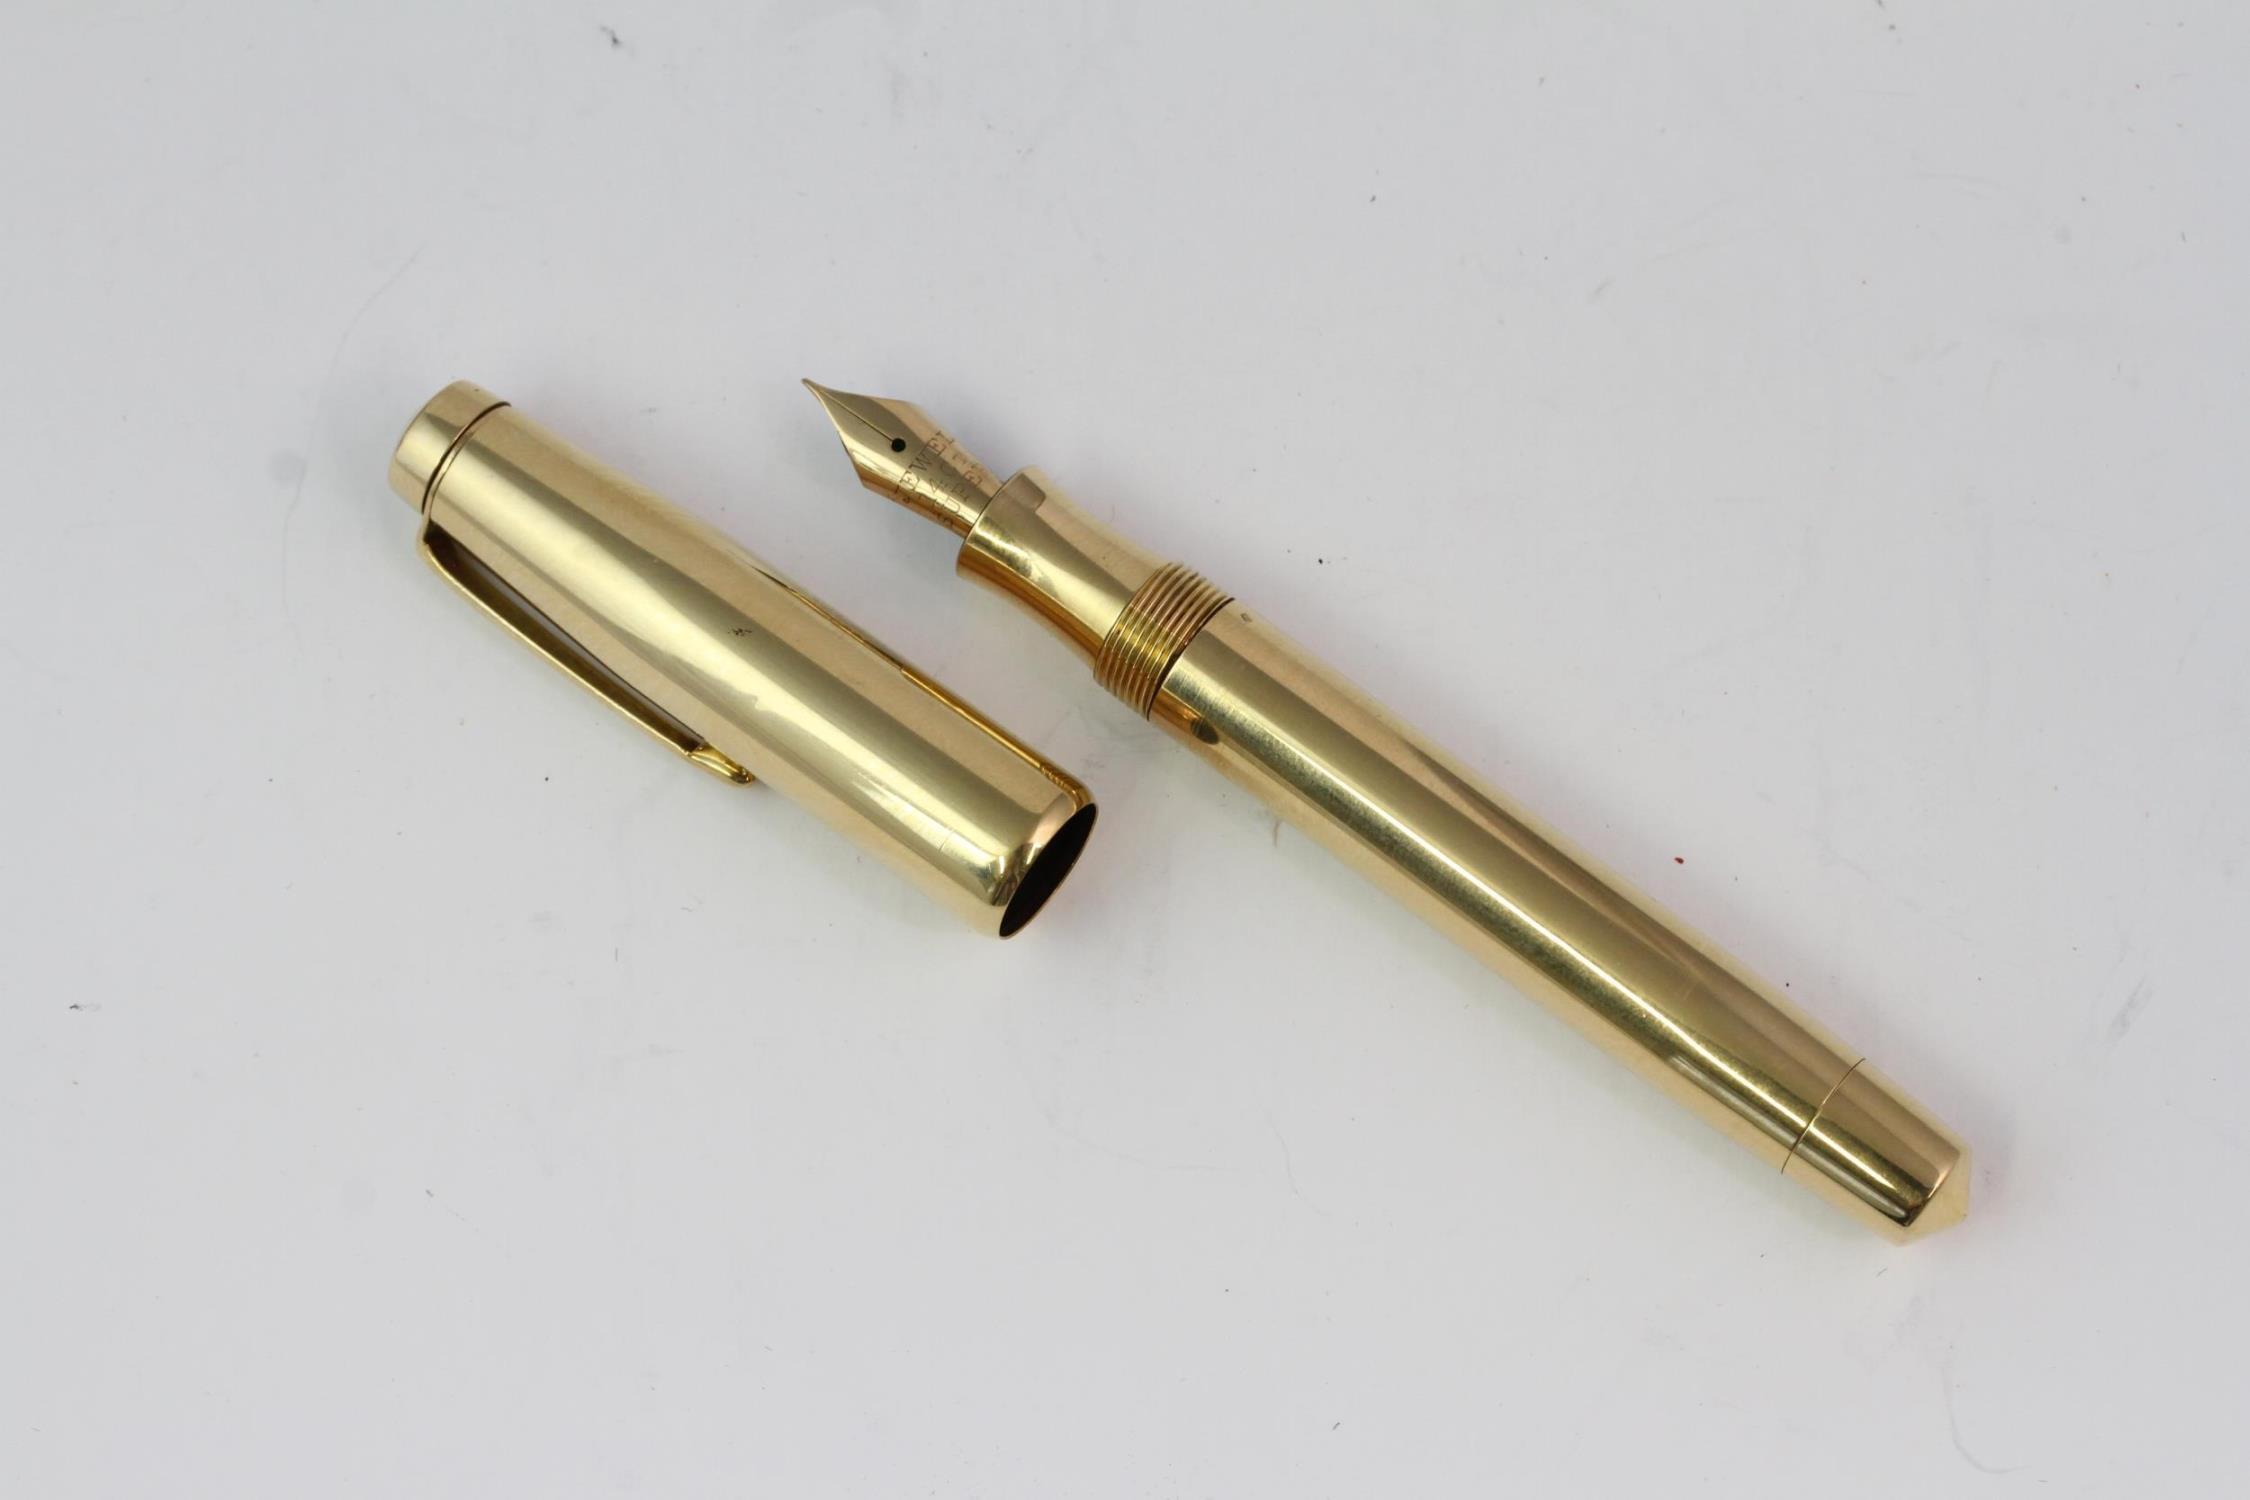 Rare Cartier French Fountain Pen 18K, Cartier Yellow Gold Pen from the 1930s, comes with the - Image 2 of 5